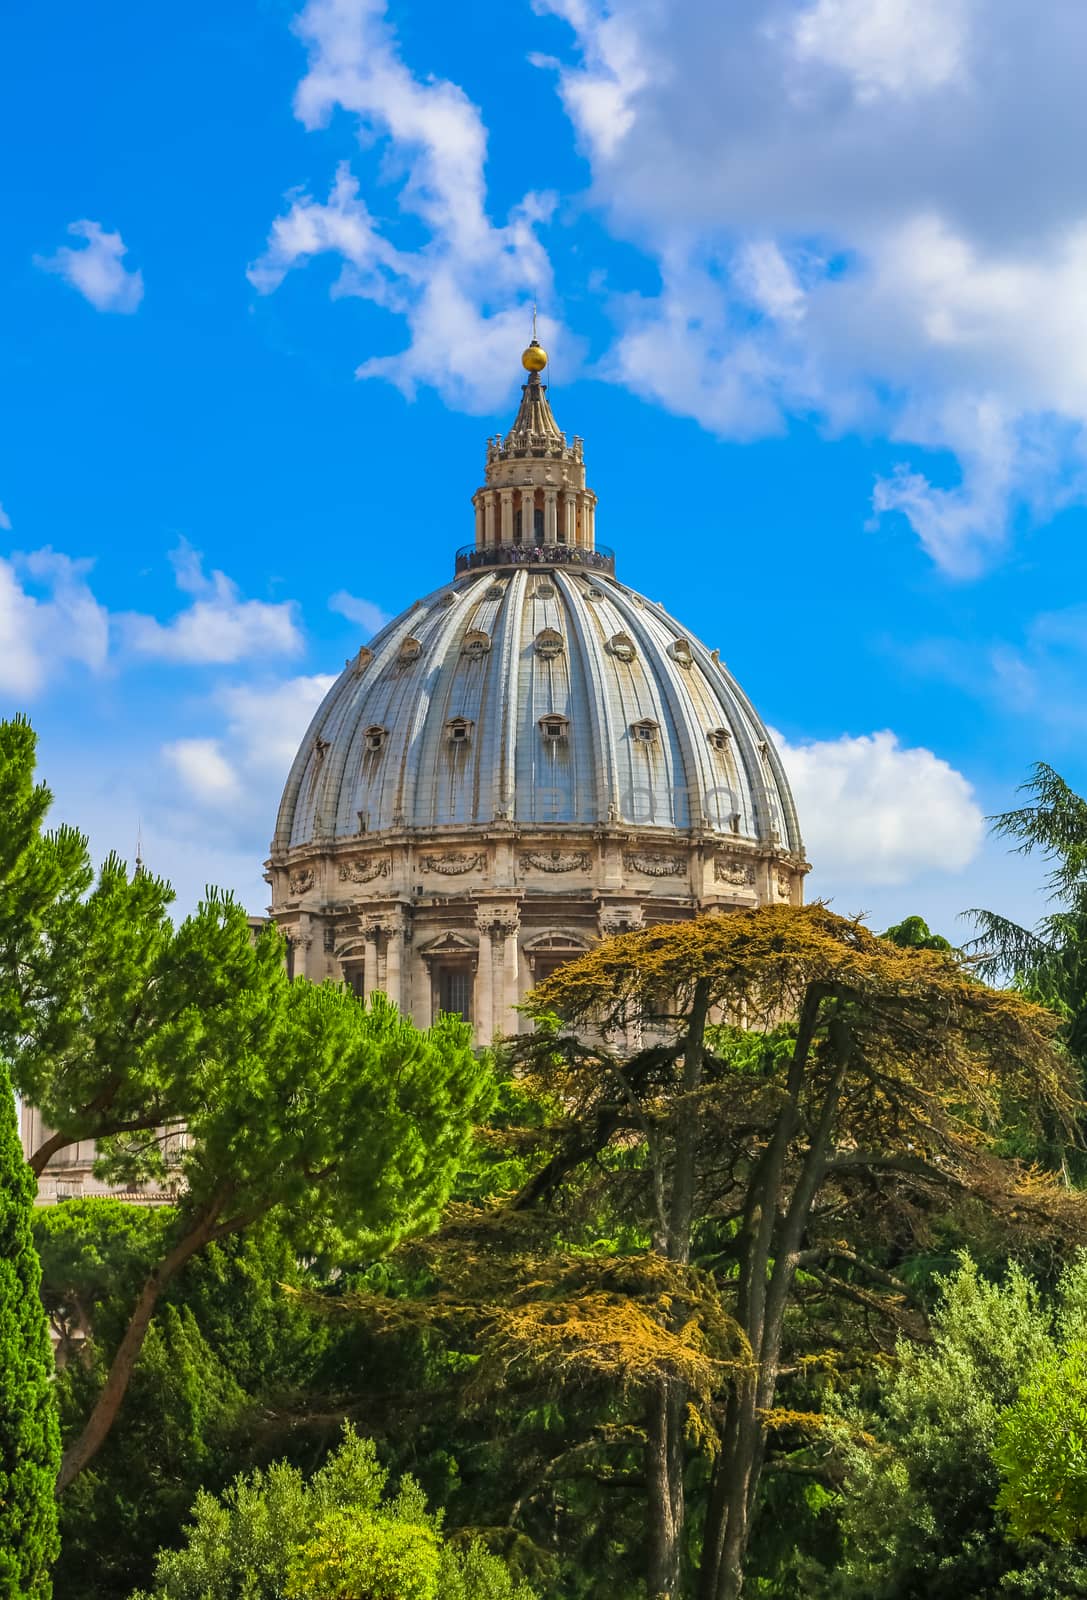 Detail of the Vatican Palace is seen above the treetops. The Dome with beautifull sky. St. Peter's Basilica, St. Peter's Square, Vatican City.